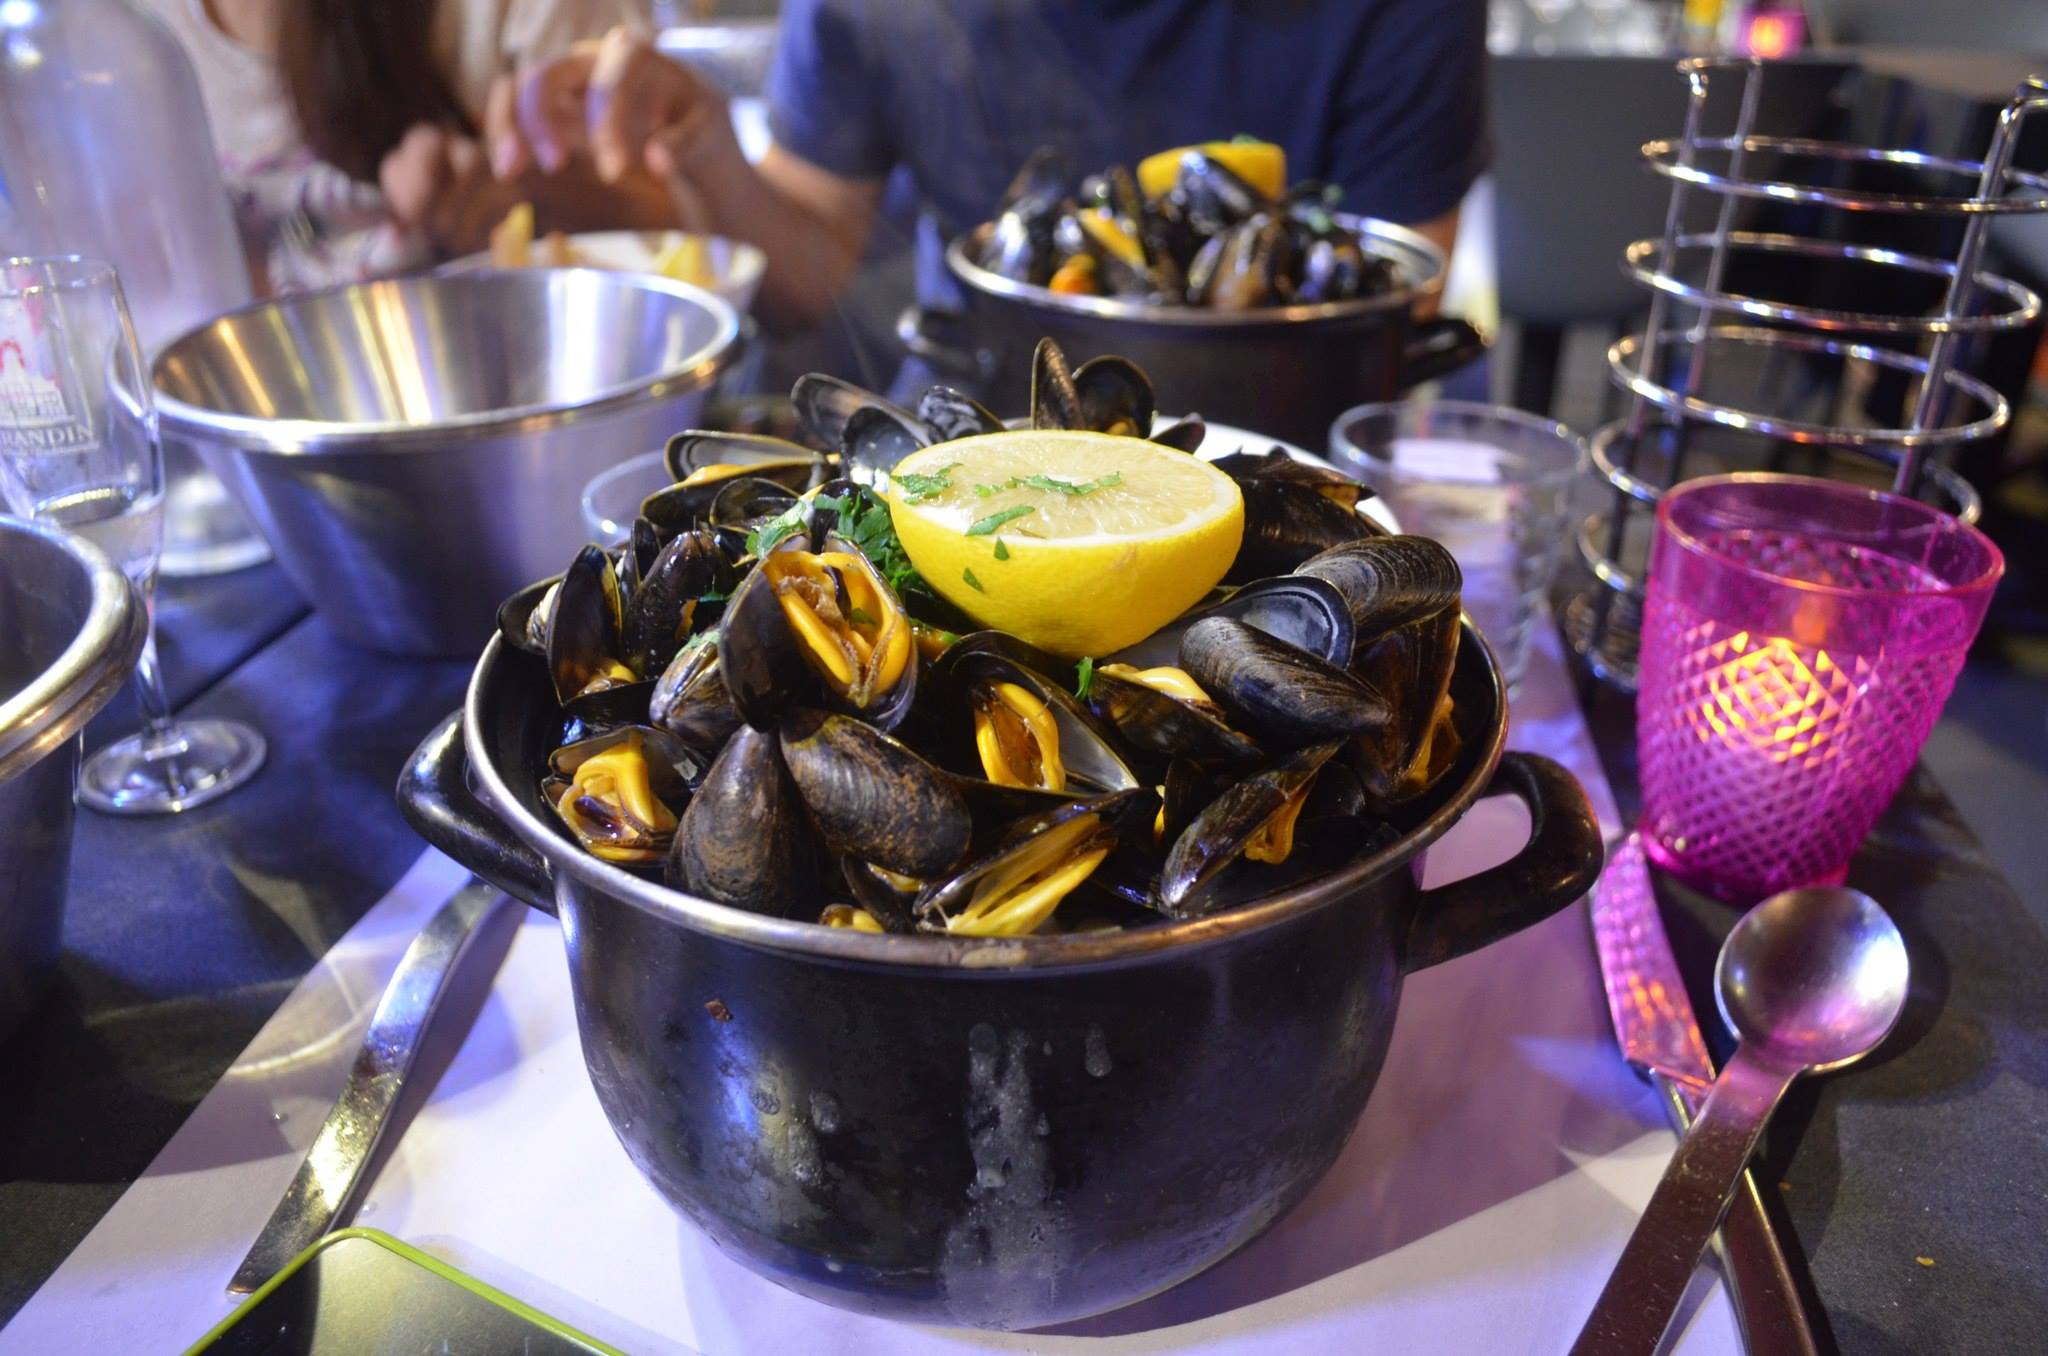 A dish of mussels at a Paris restaurant